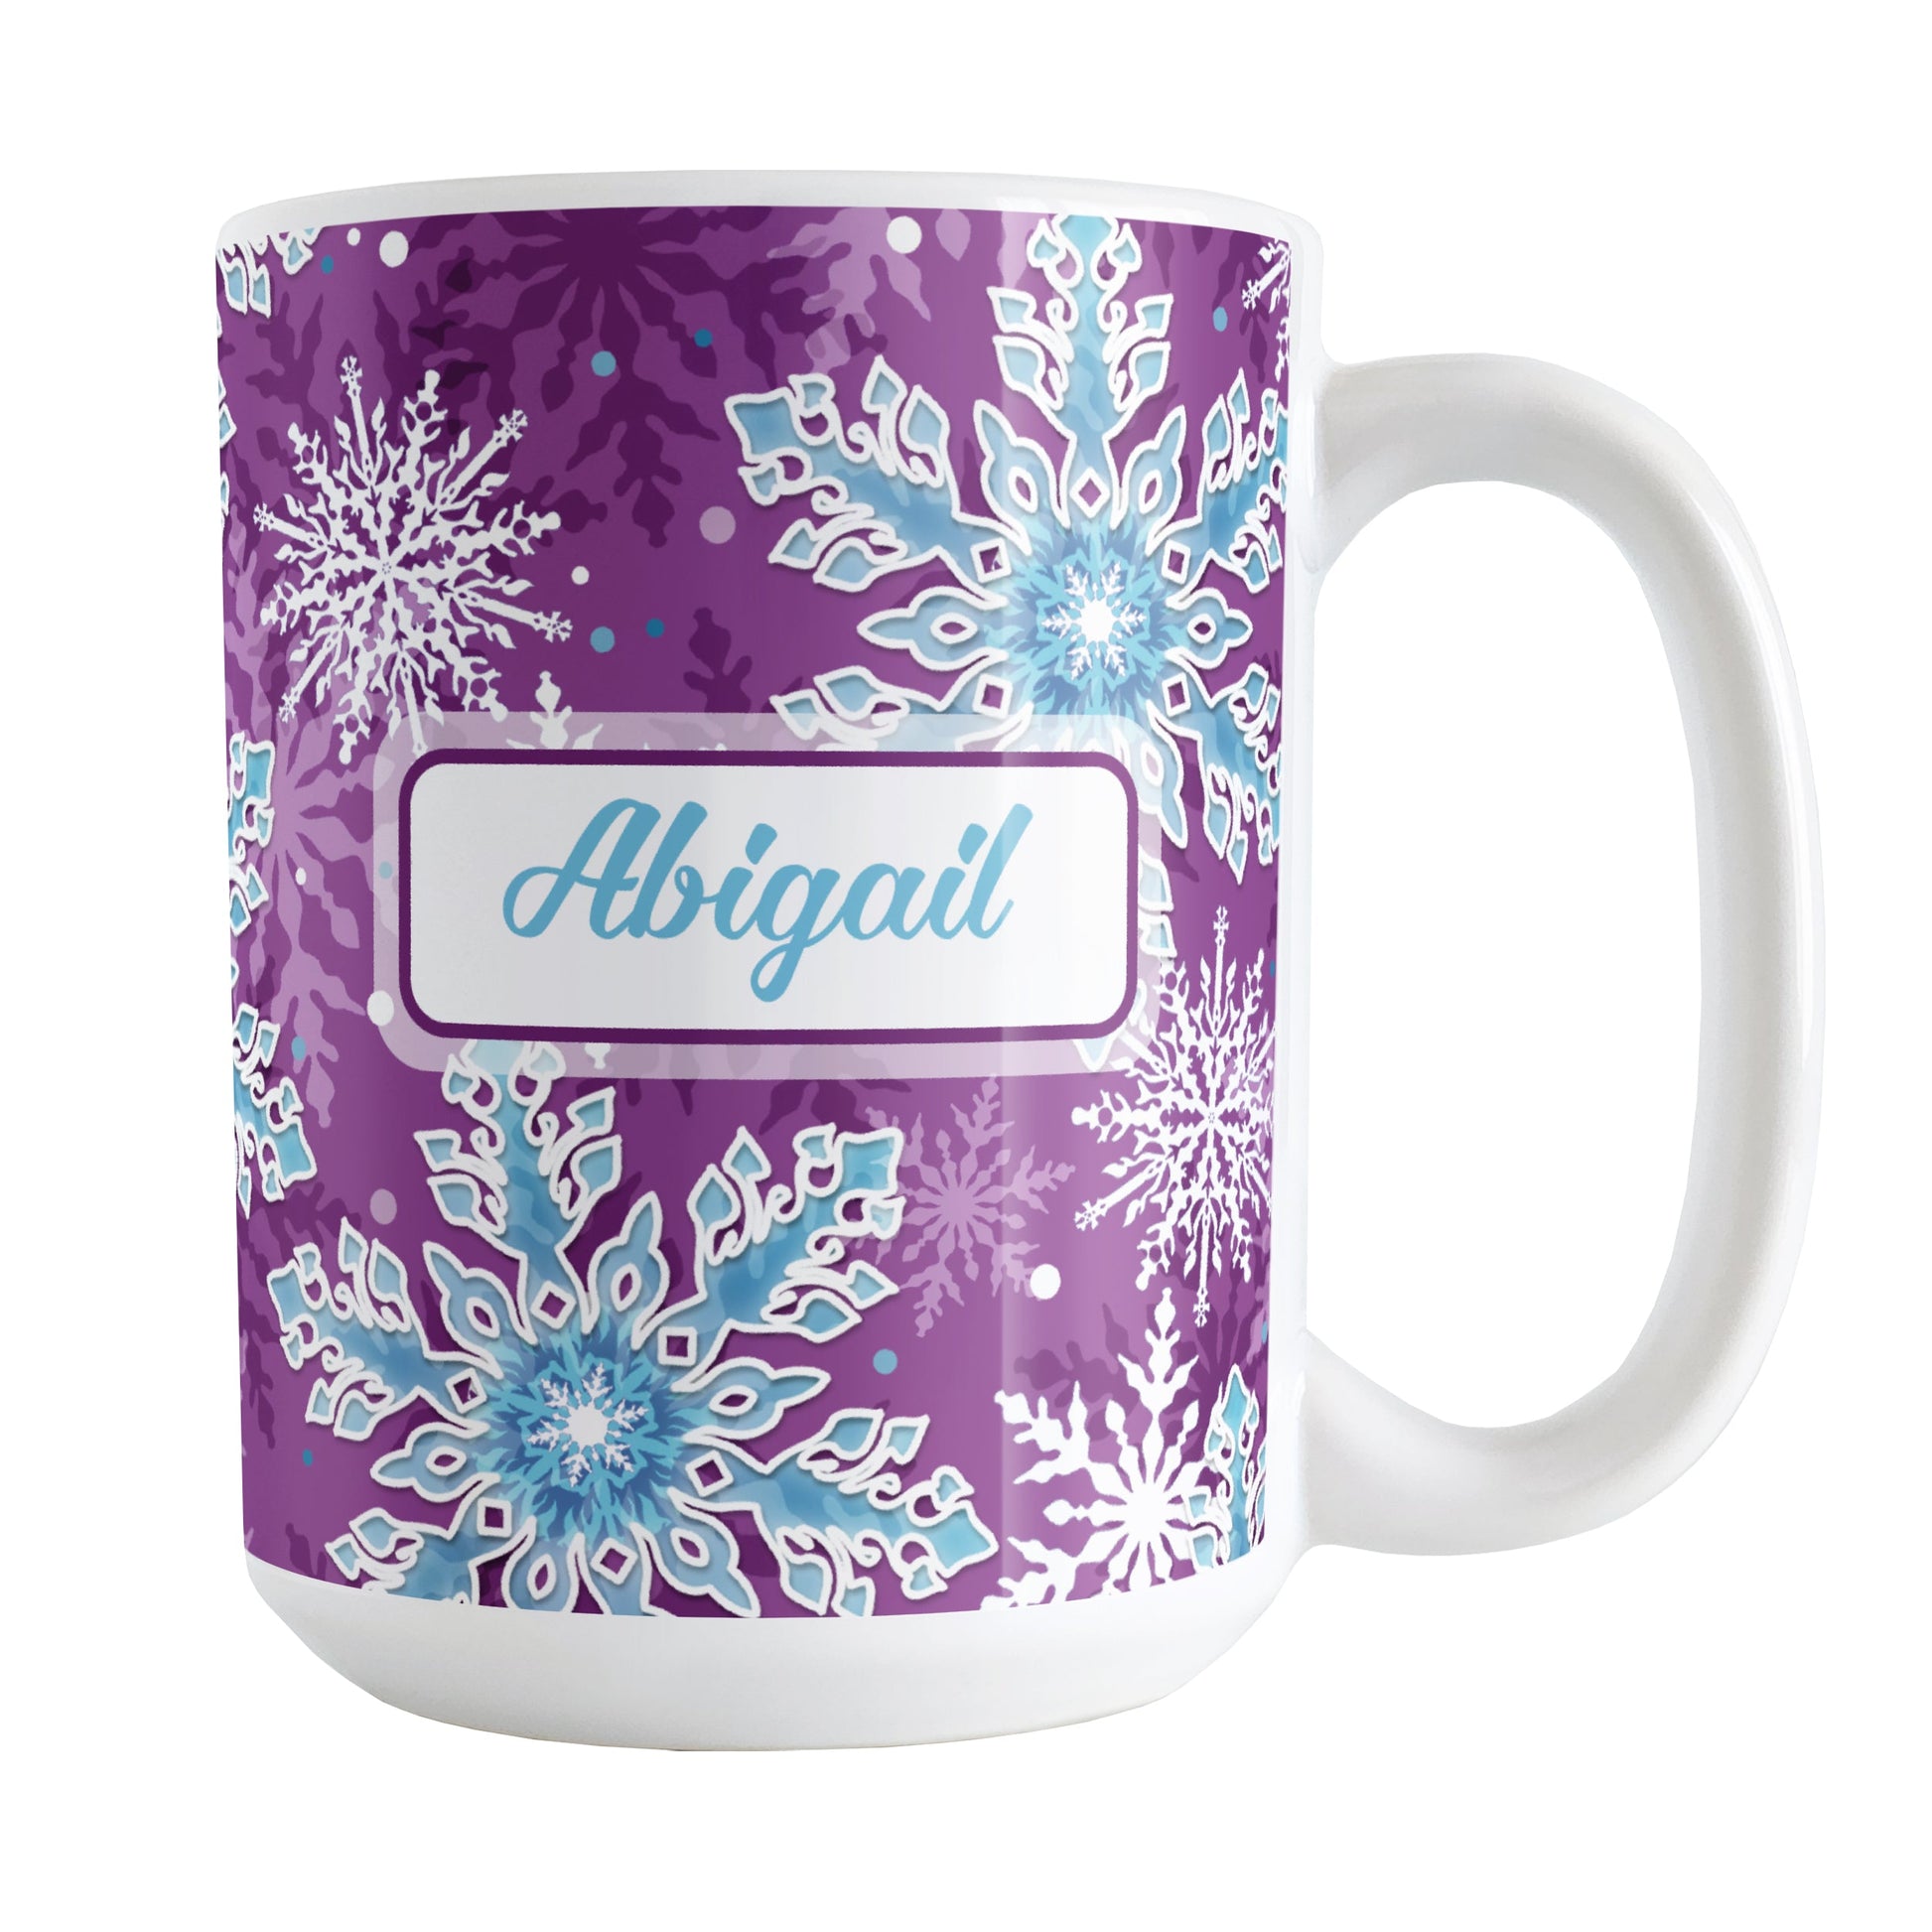 Personalized Purple Blue Snowflake Winter Mug (15oz) at Amy's Coffee Mugs. A ceramic coffee mug designed with a pattern of aqua blue and white snowflakes over a purple background color that wraps around the mug to the handle. Your name is custom printed in an aqua blue script font on both sides of this winter themed mug.